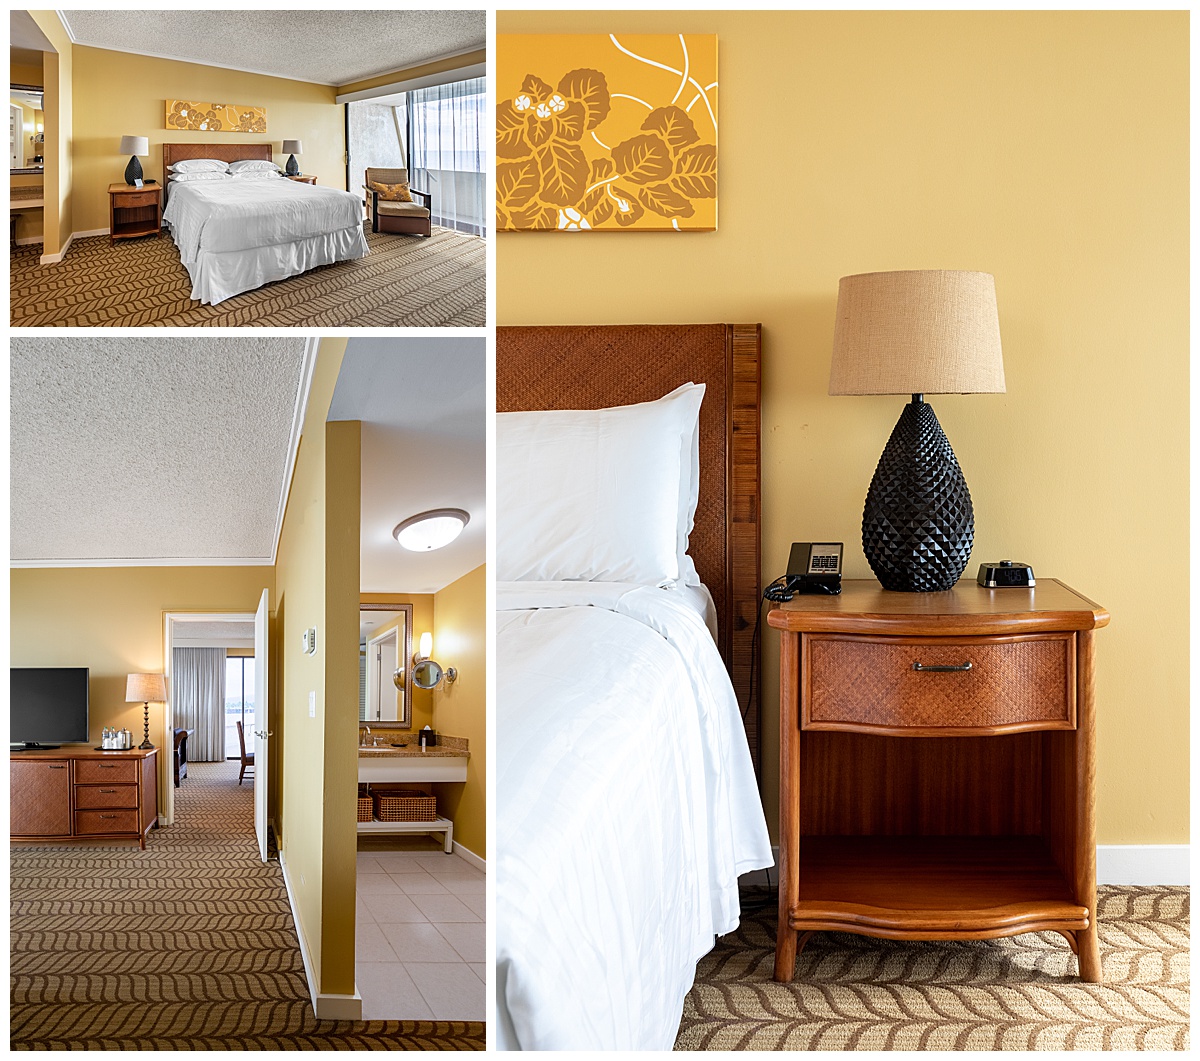 The Deluxe Oceanfront Suite. The rooms have yellow walls and brown textured carpet. The accessories and features are yellow, teal, and brown. Photos of the bedroom.